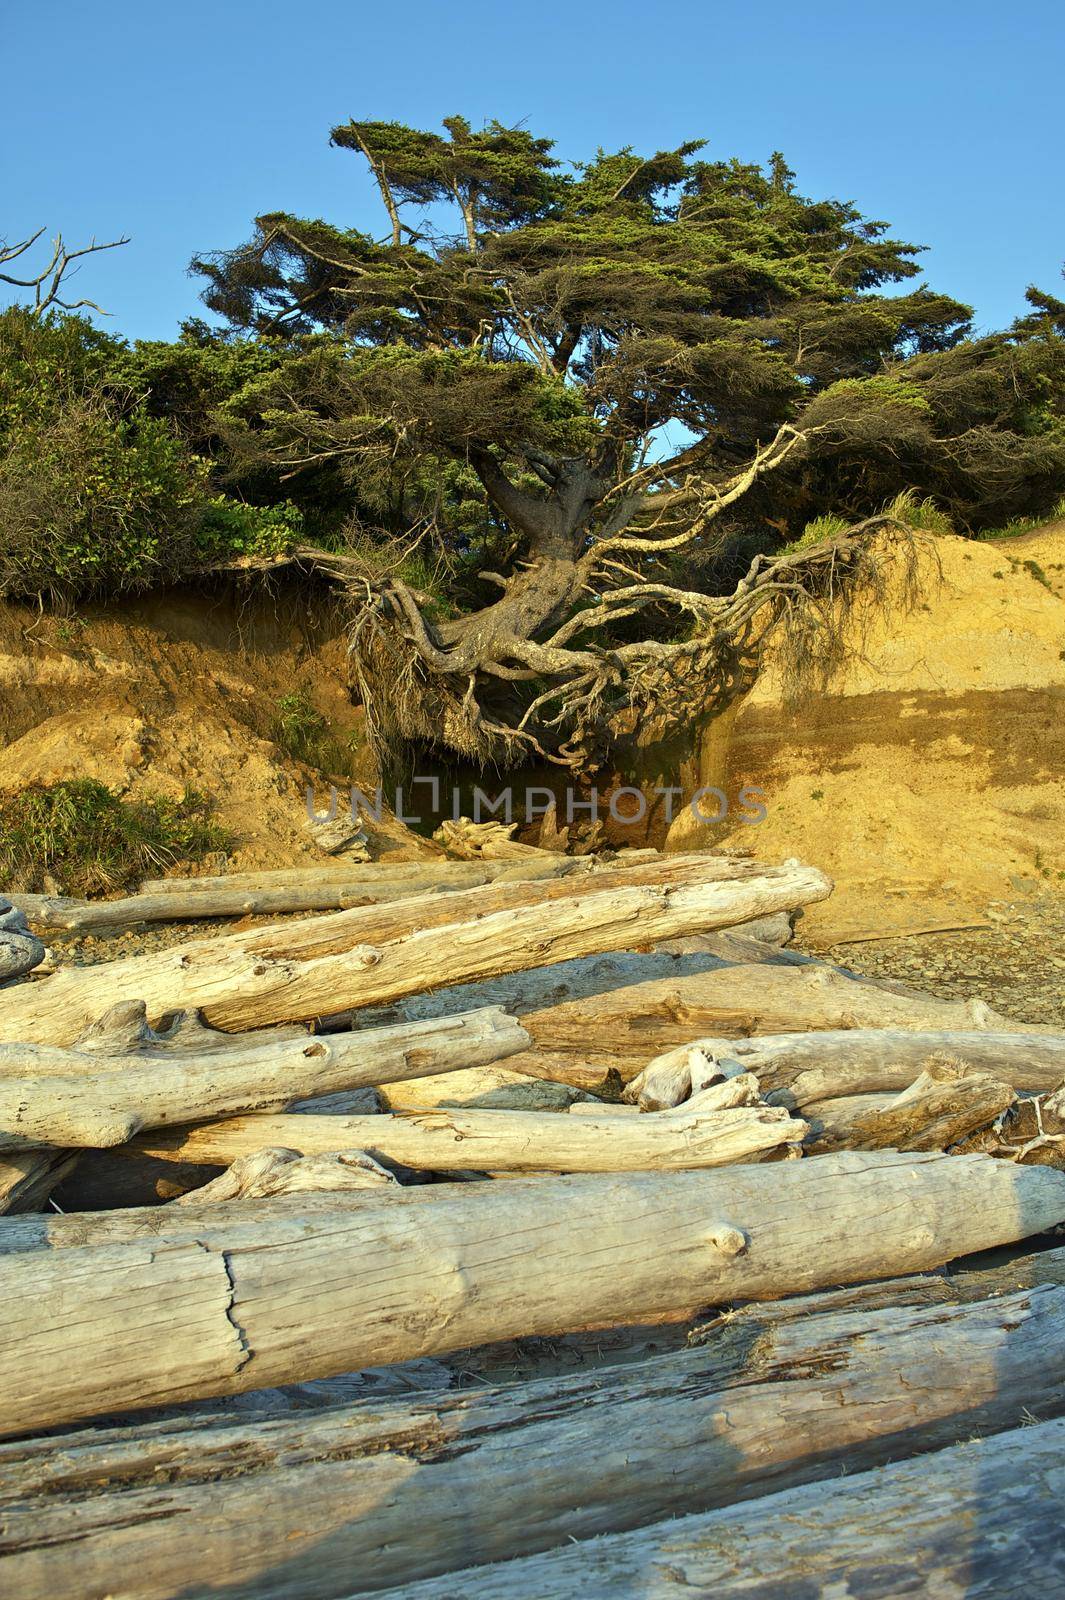 Levitating Beach Tree - Pacific Ocean Beach, Washington State USA. The Power of the Nature. by welcomia